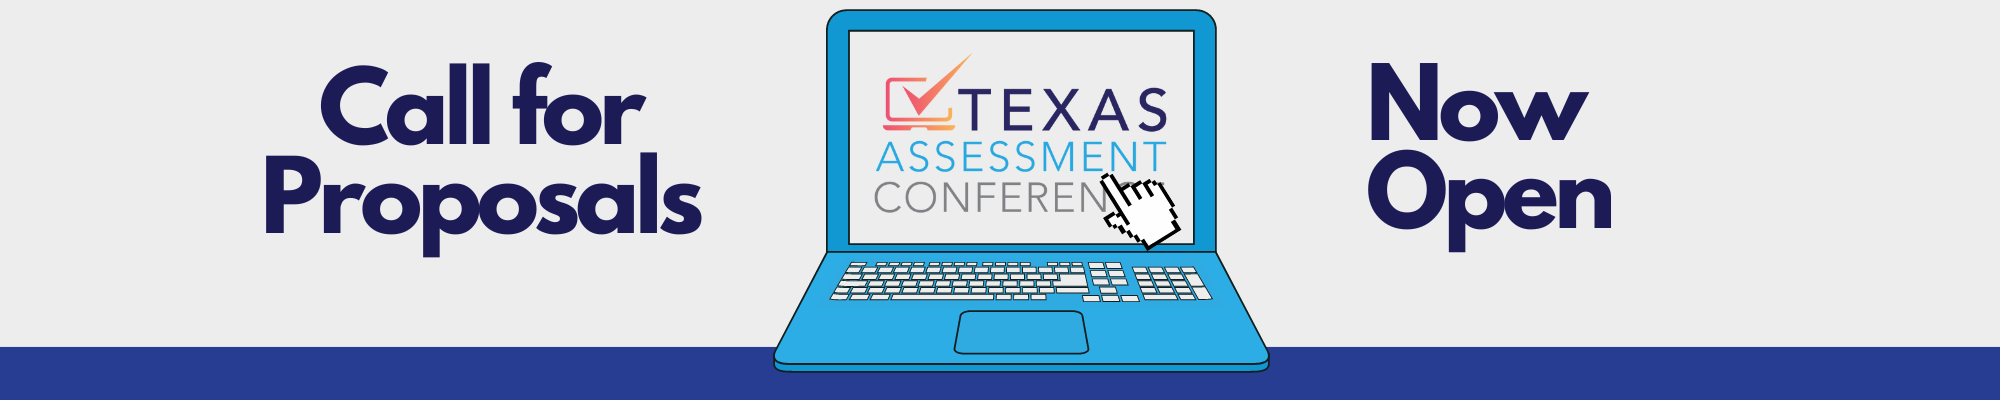 texas assessment conference 2022 presentations